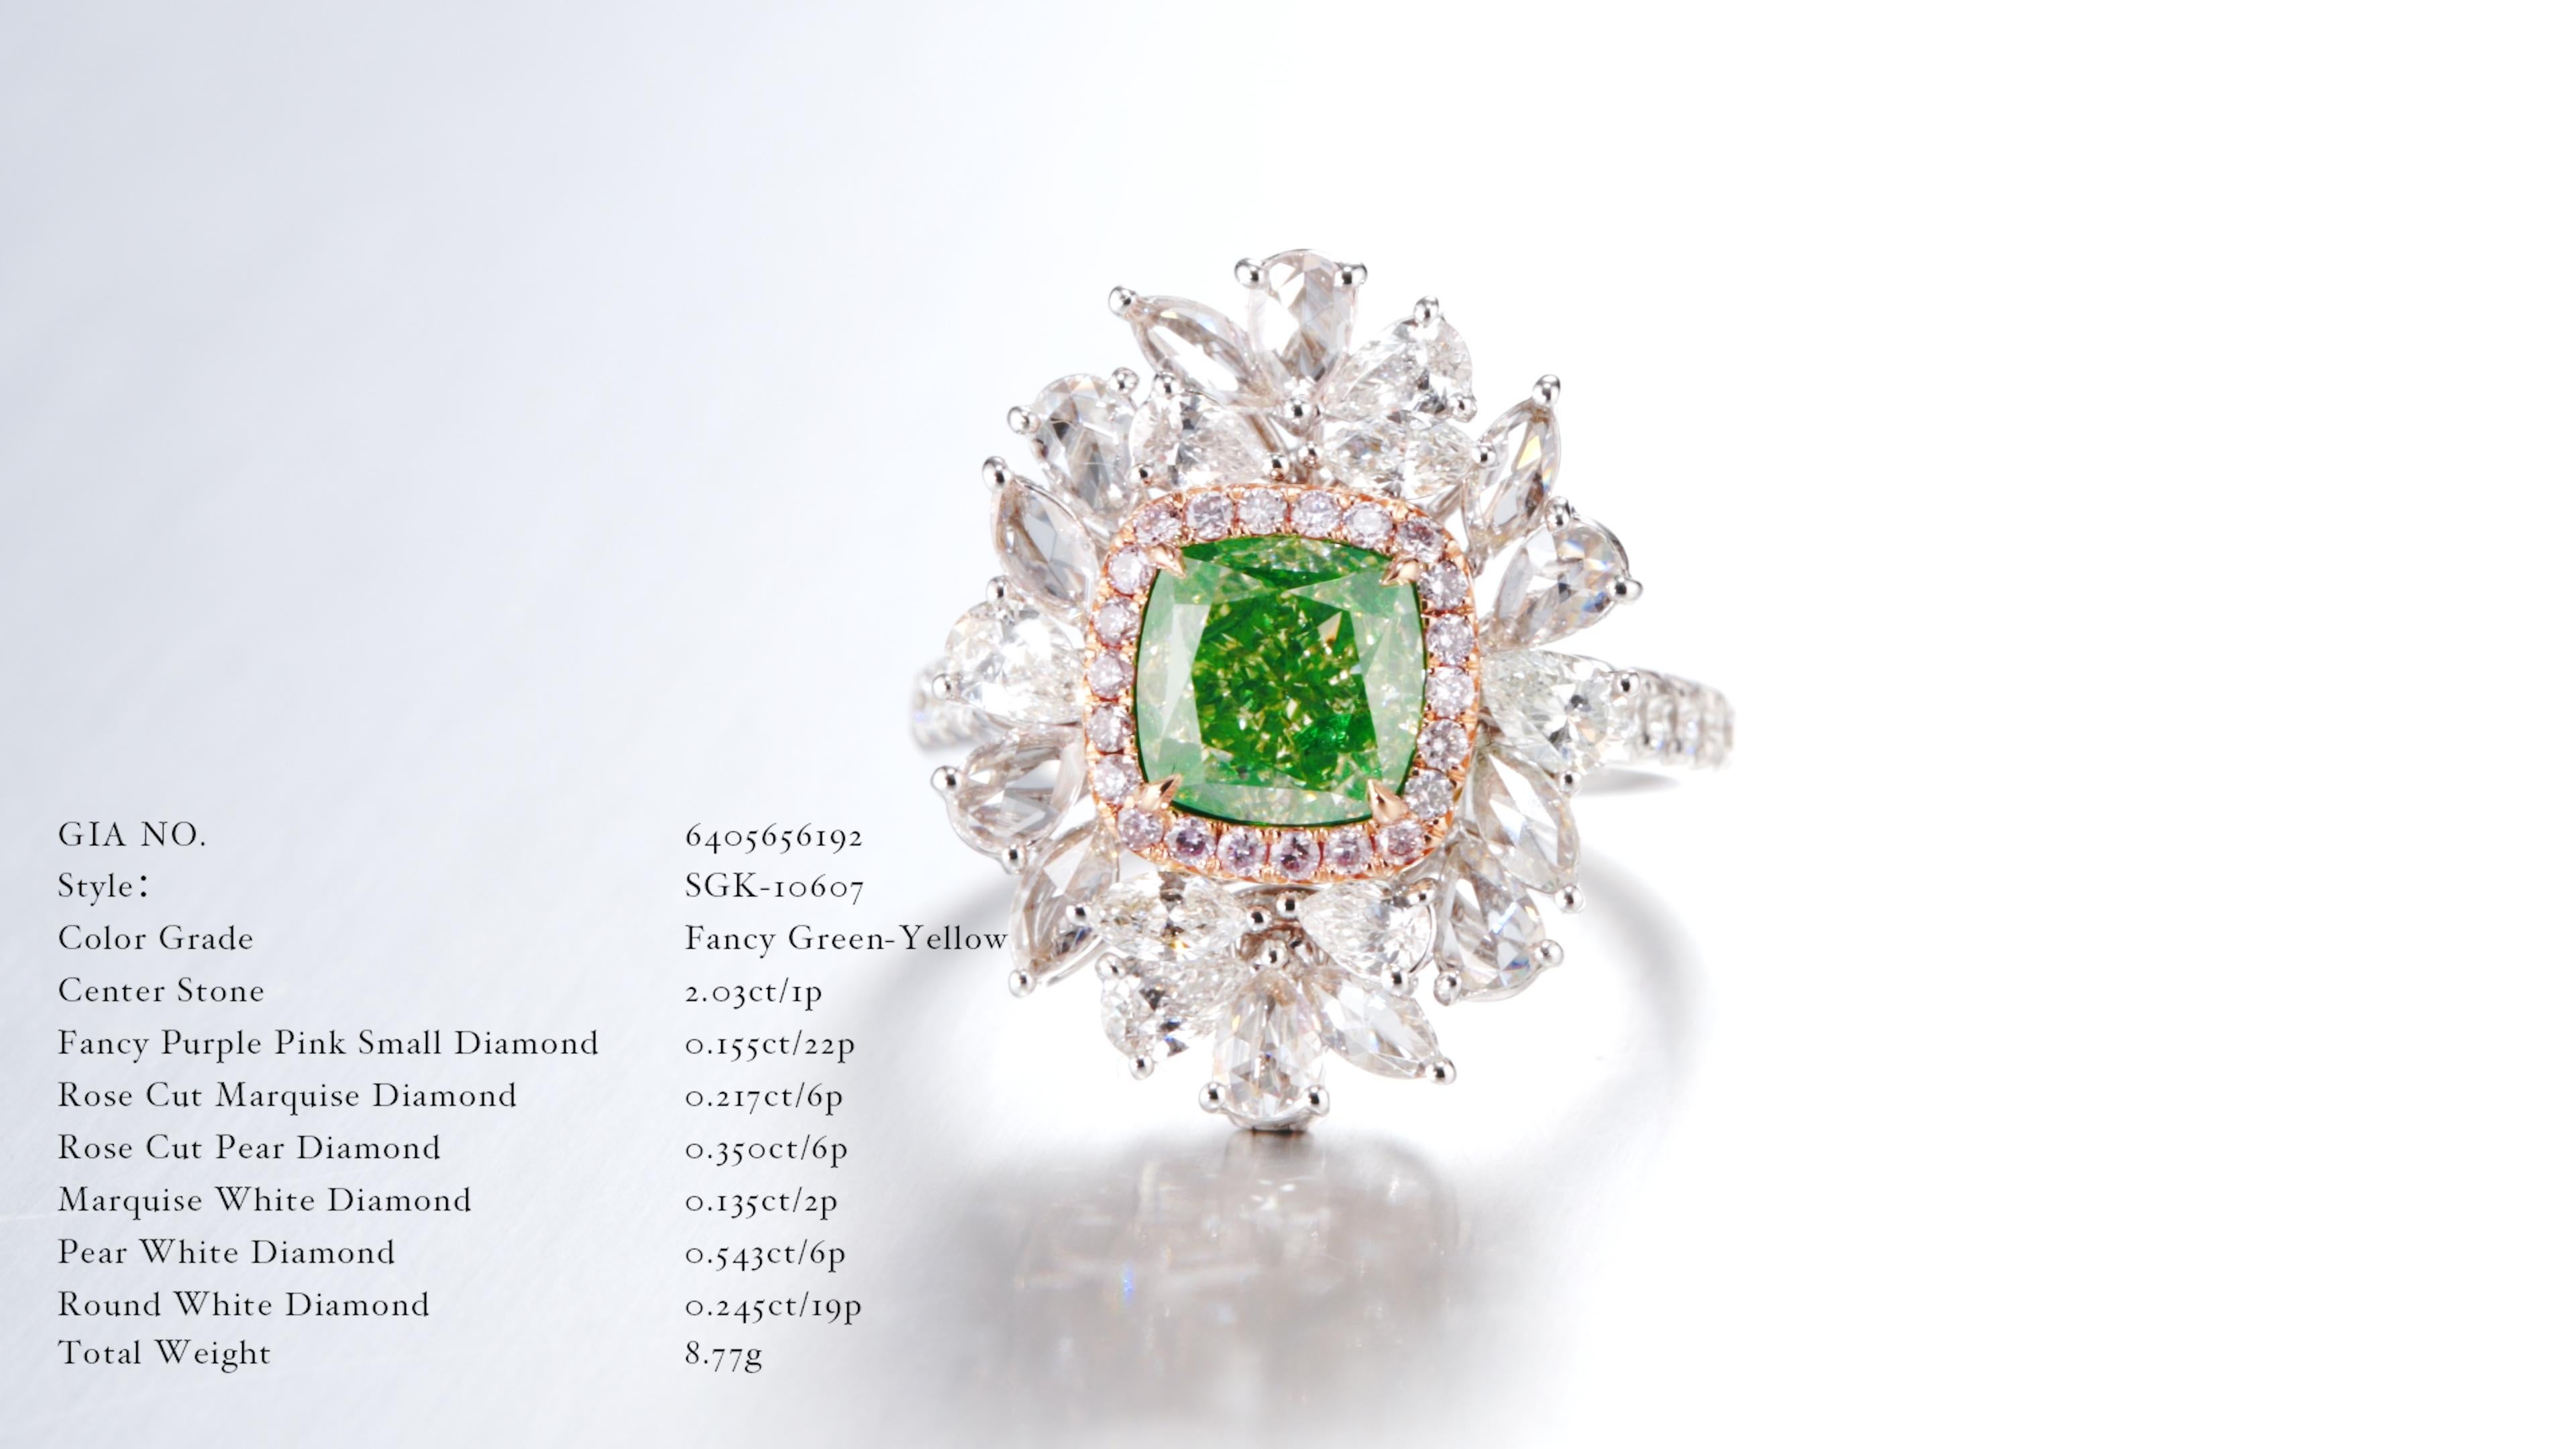 Introducing a breathtaking piece of artistry, this exquisite ring showcases a mesmerizing 2-carat center stone that steals the spotlight. The centerpiece is a natural fancy greenish-yellow diamond, GIA certified to attest to its unparalleled quality